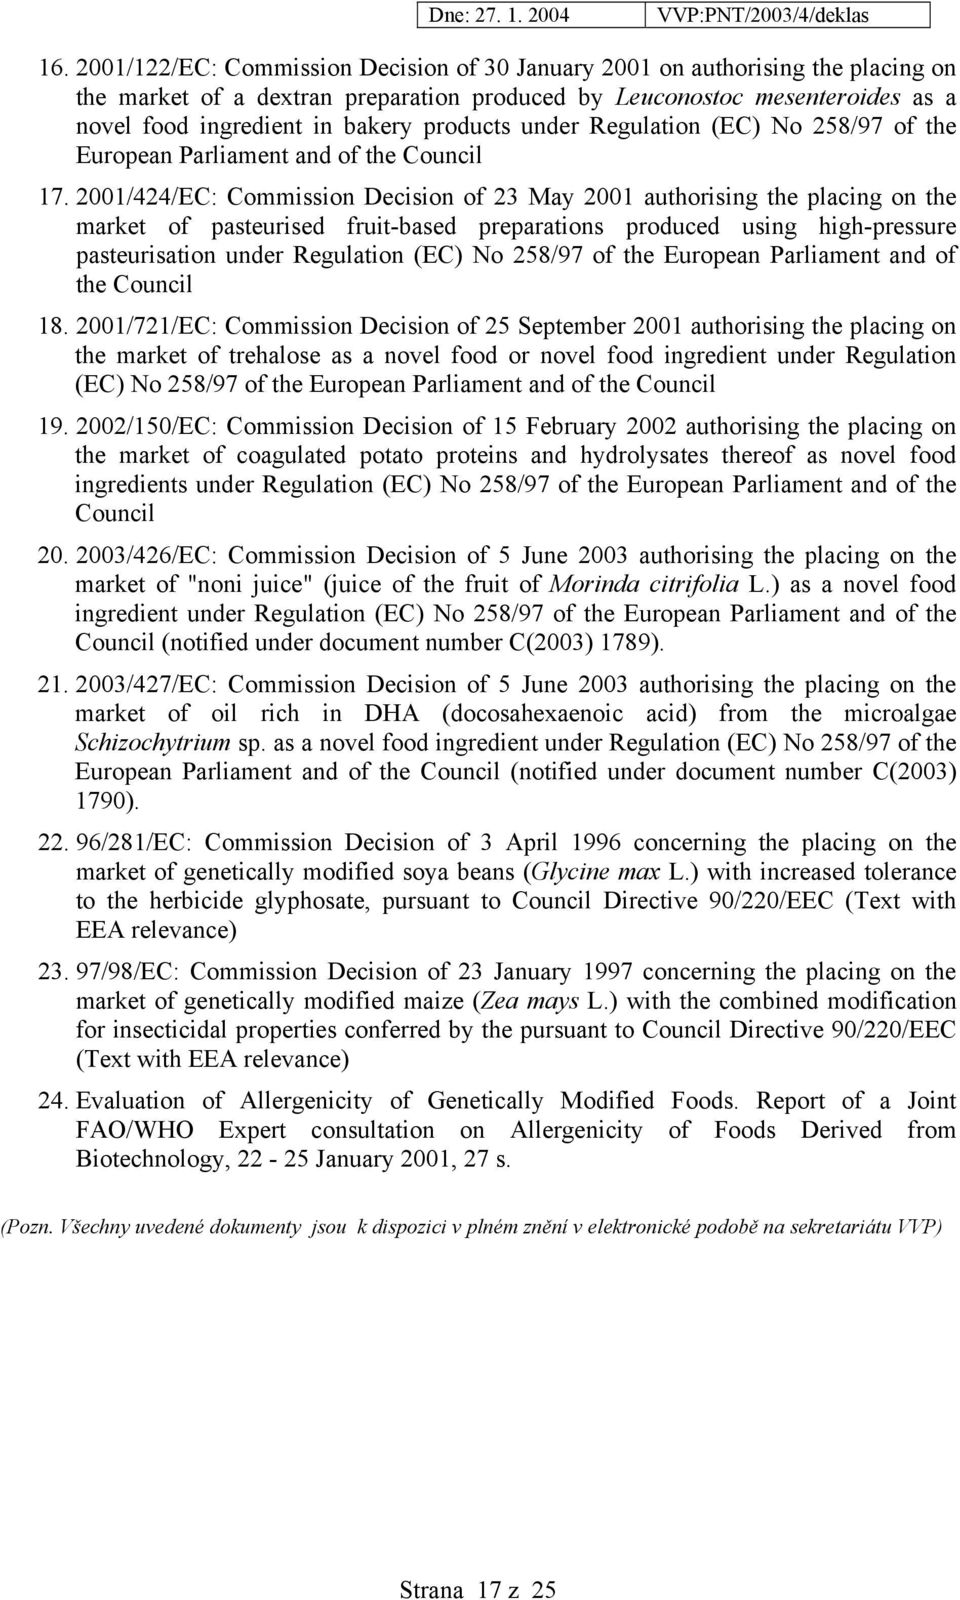 2001/424/EC: Commission Decision of 23 May 2001 authorising the placing on the market of pasteurised fruit-based preparations produced using high-pressure pasteurisation under Regulation (EC) No